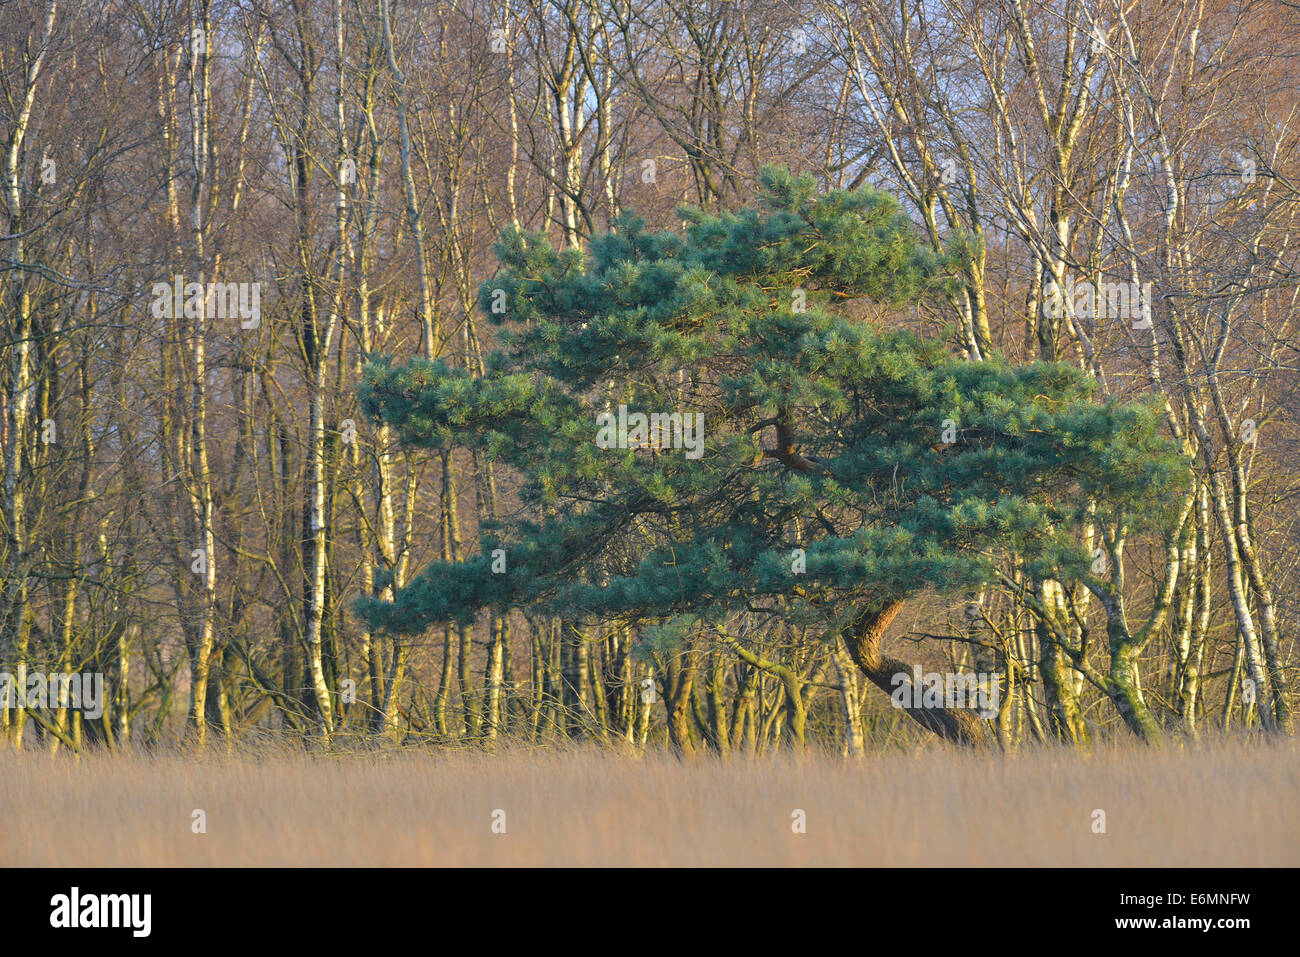 A Scots Pine (Pinus sylvestris) and a Downy Birch (Betula pubescens) in a bog environment, Tinner Dose, Emsland region Stock Photo